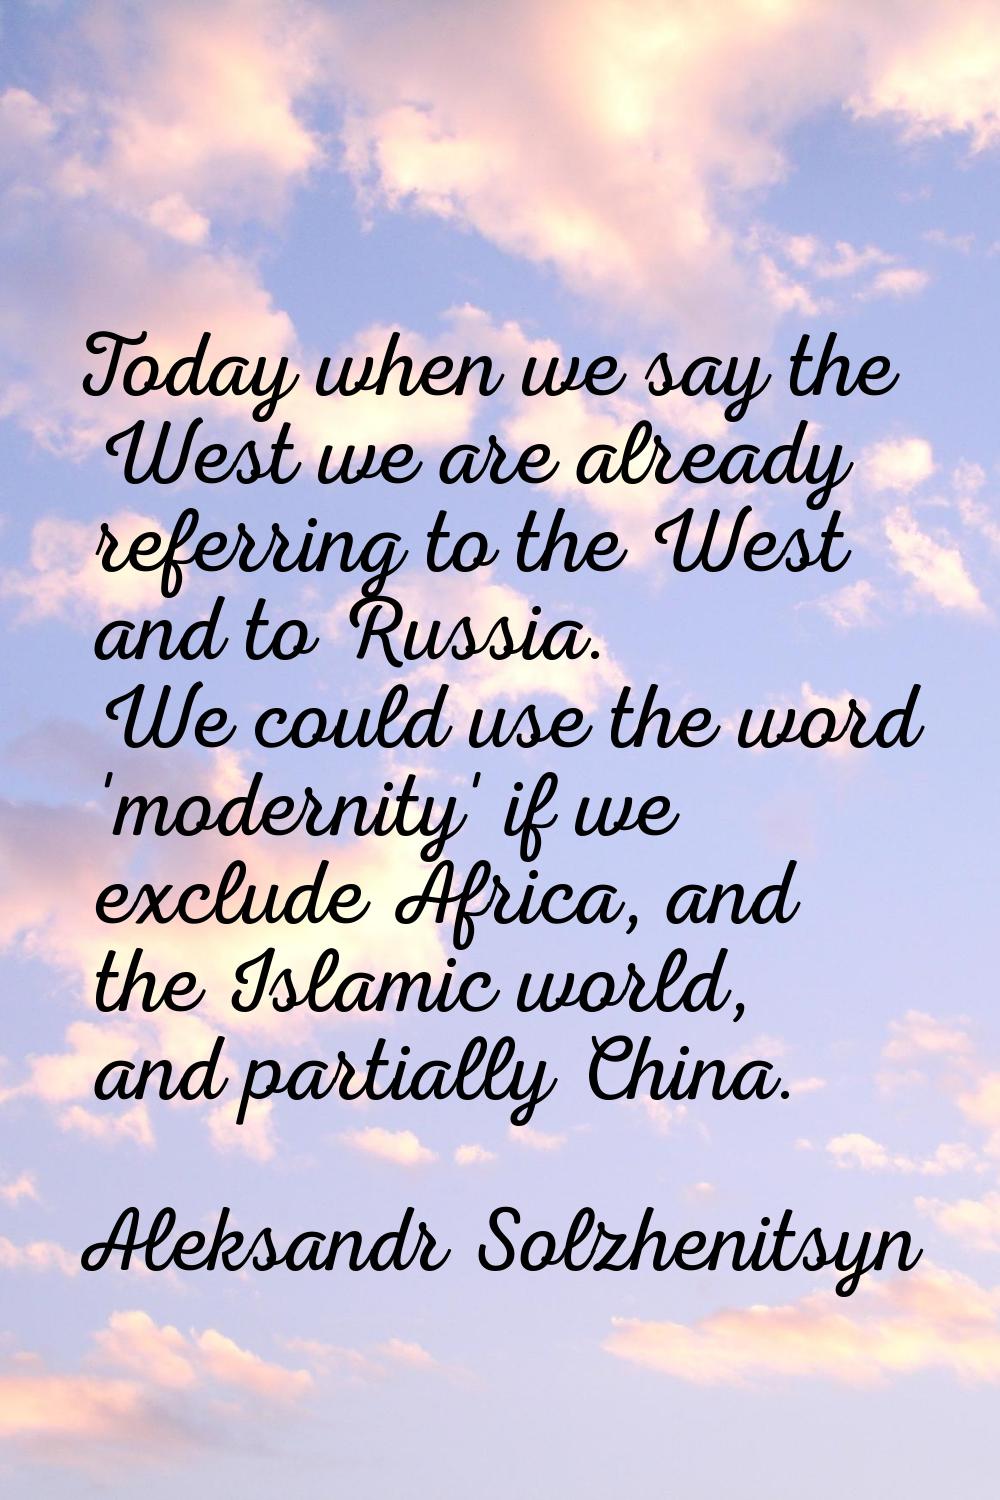 Today when we say the West we are already referring to the West and to Russia. We could use the wor